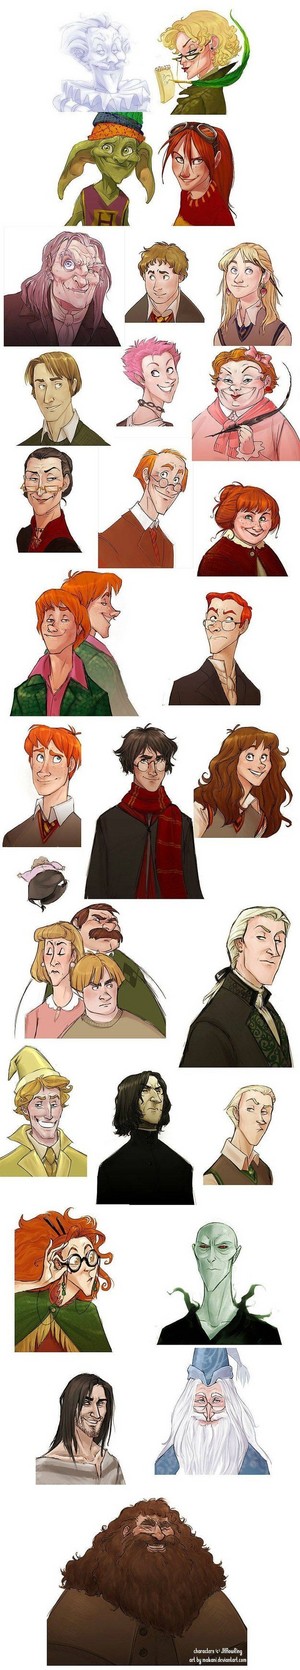 Disney and Harry Potter